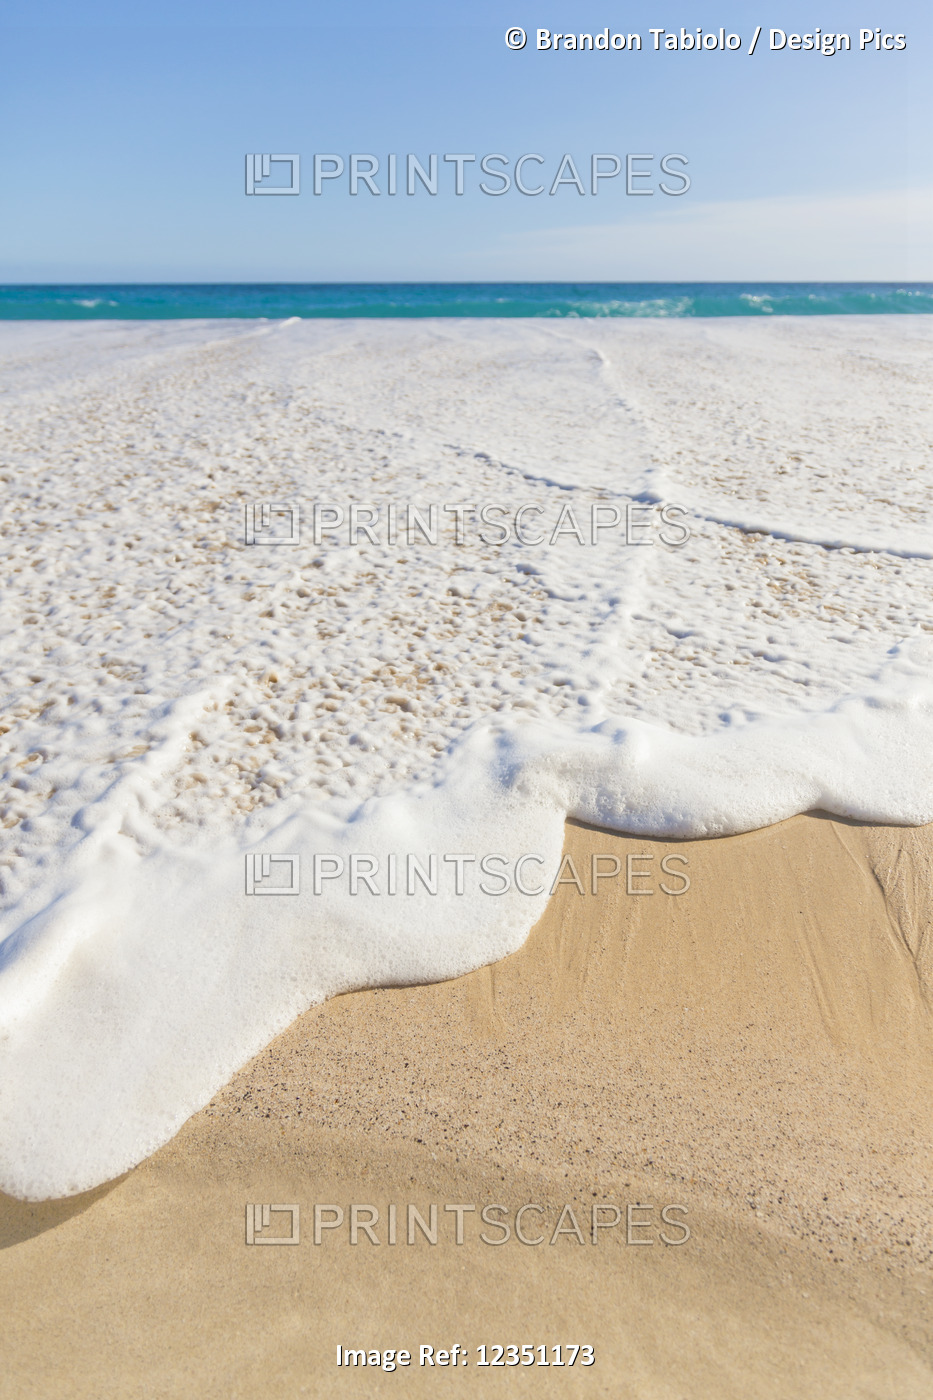 The ocean whitewash sea foam rising high onto the sand at the beach on the ...